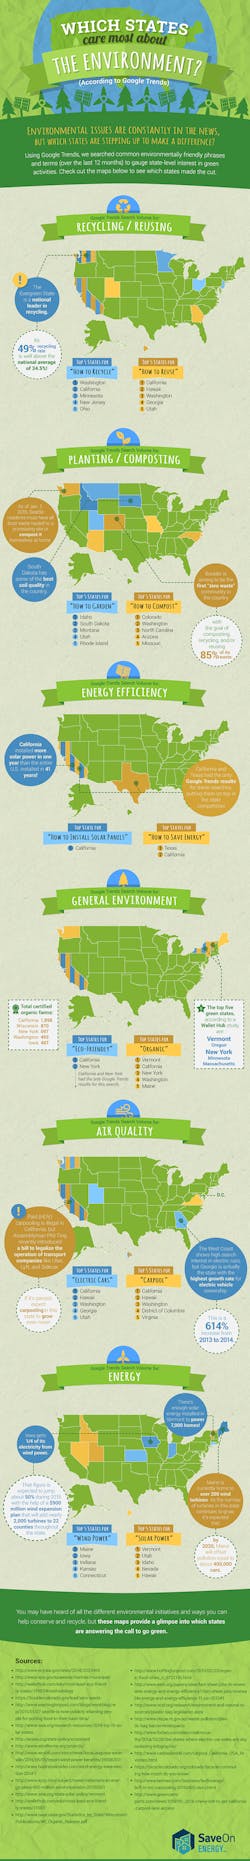 Ehstoday Com Sites Ehstoday com Files Uploads 2015 03 Which States Care About The Planet Infographic